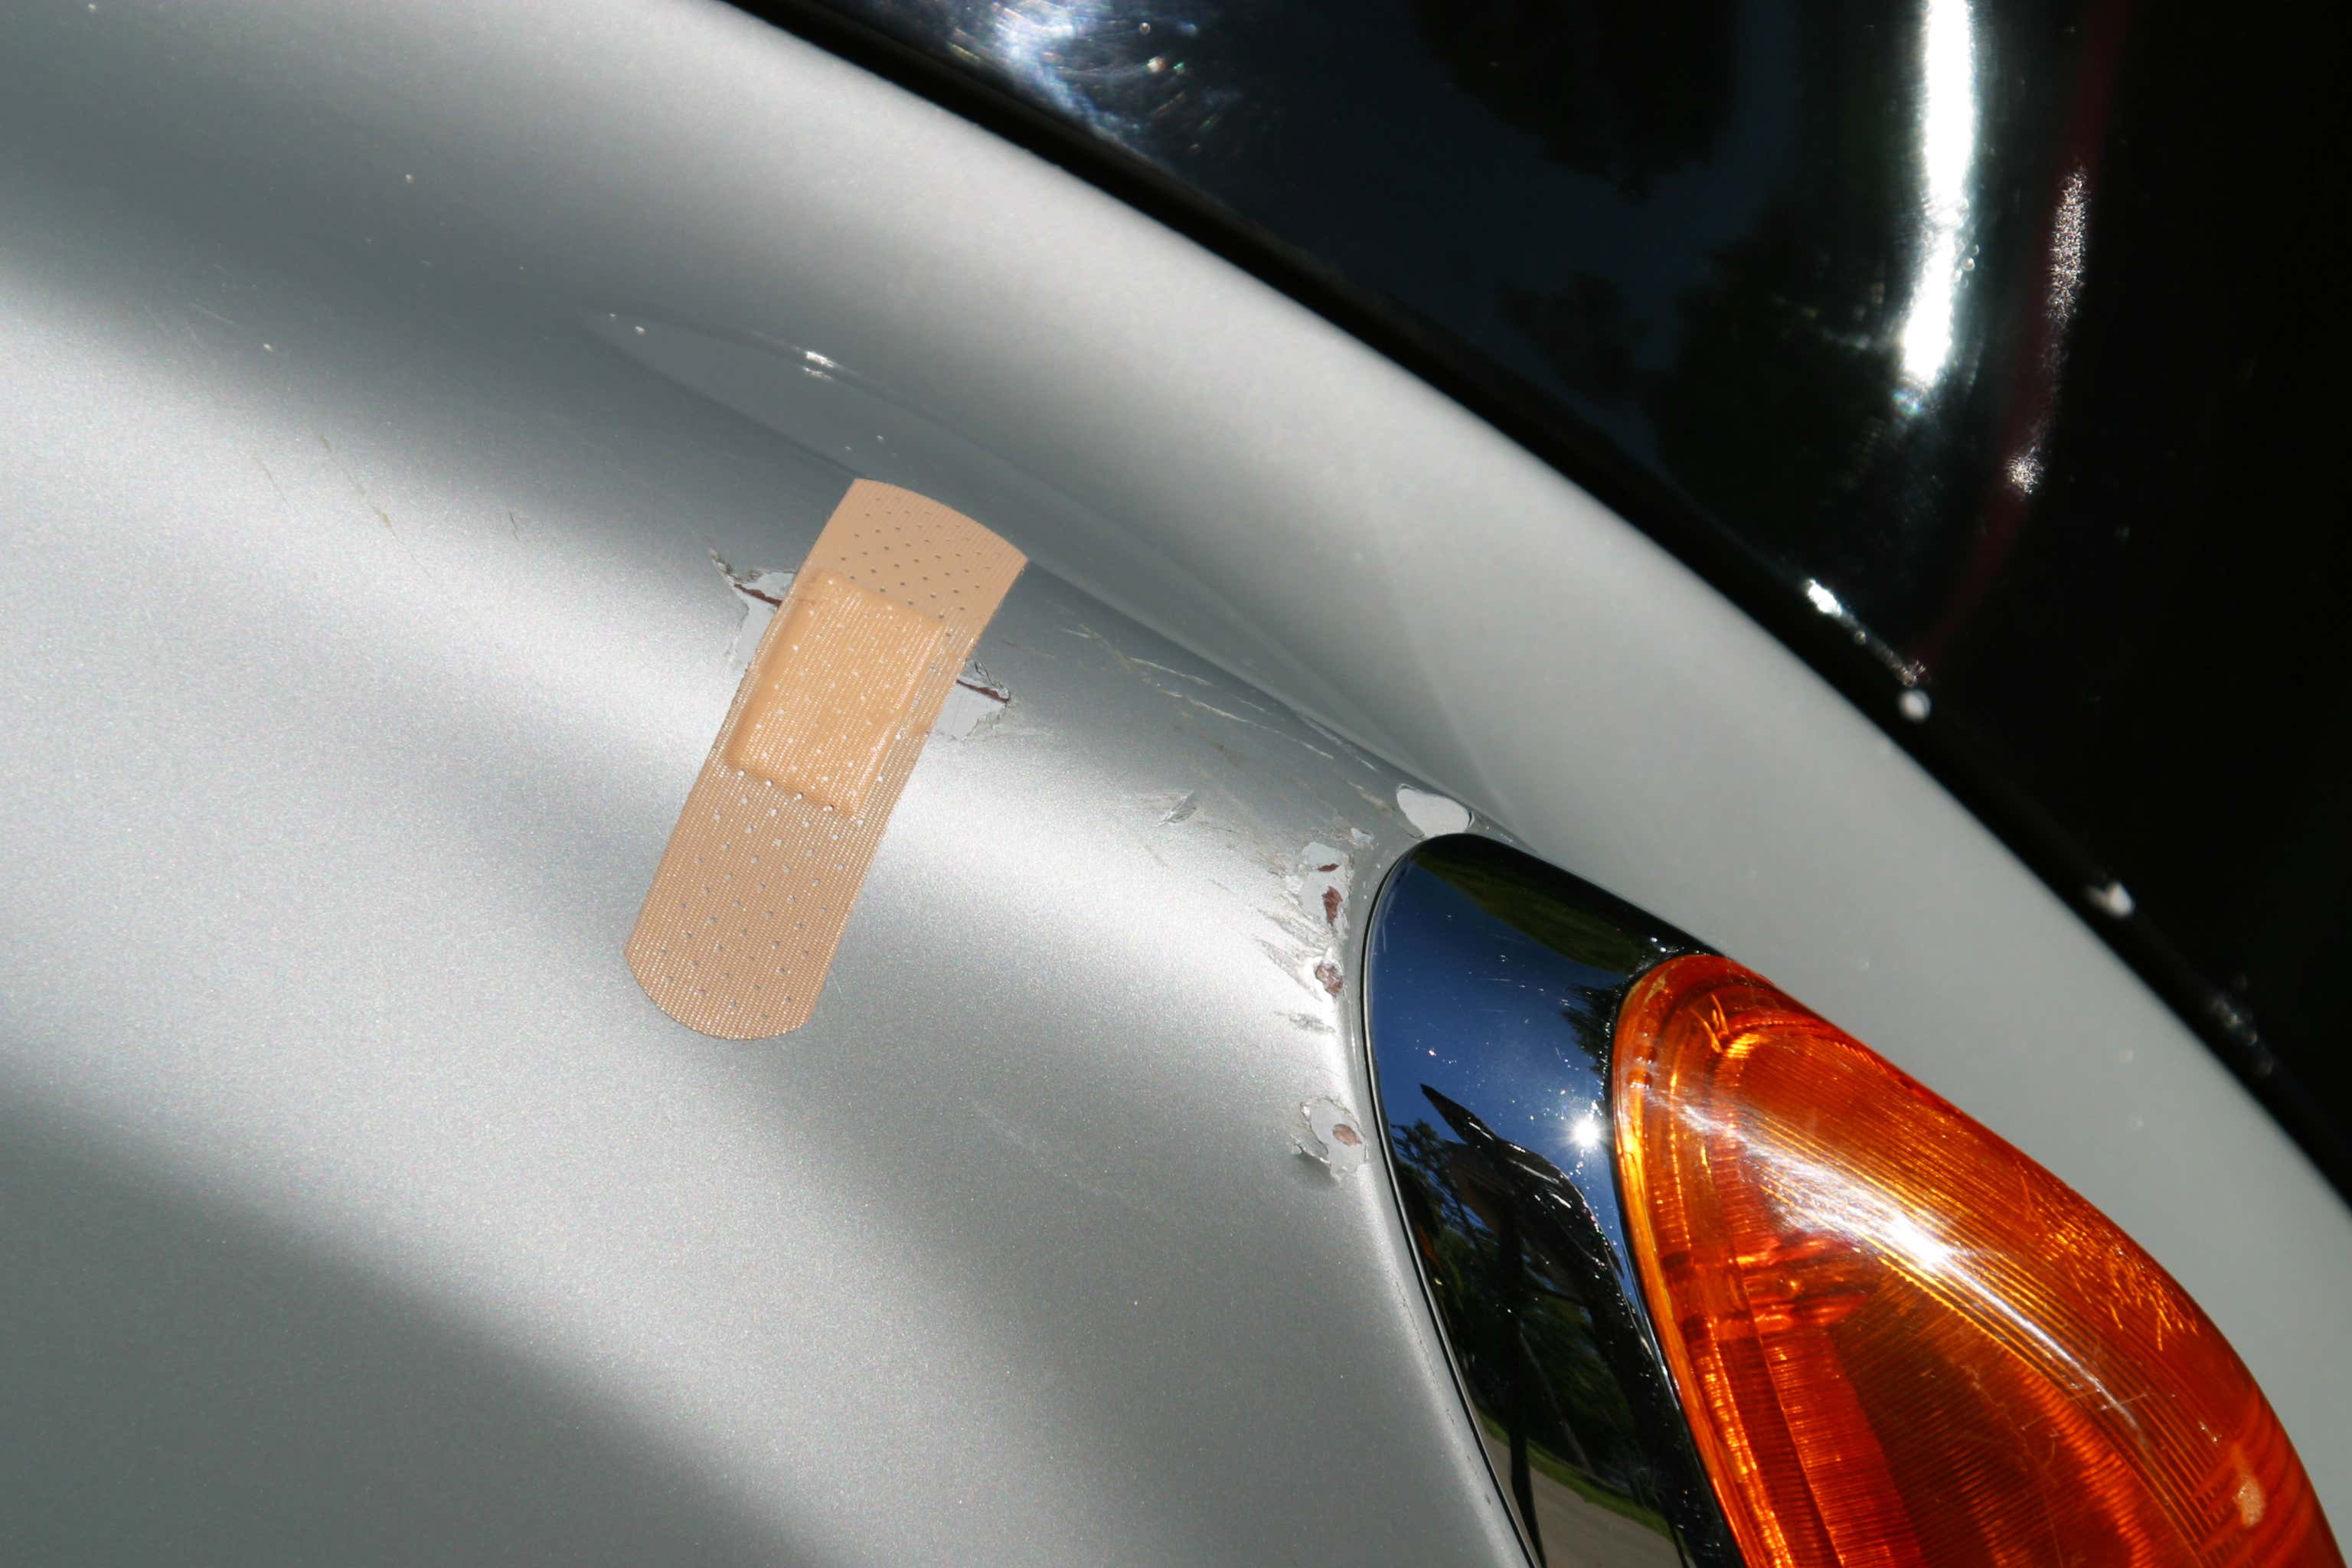 Band-Aid being used to cover a scratch on side of a silver car